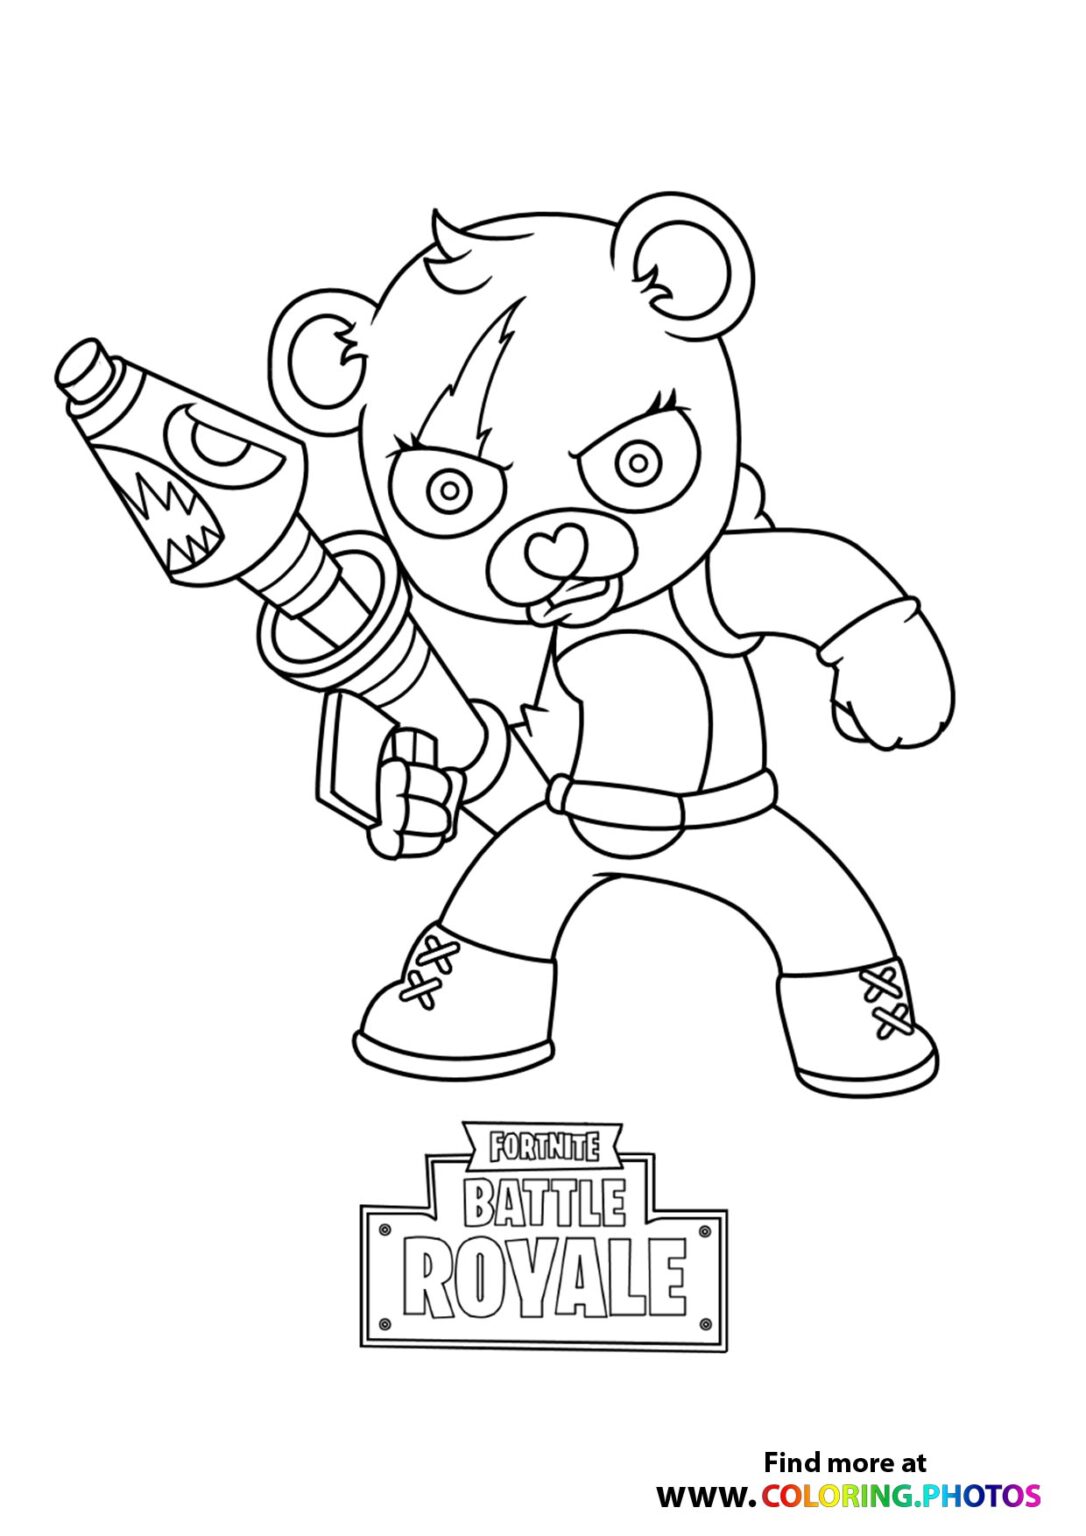 Marshmello - Fortnite - Coloring Pages for kids